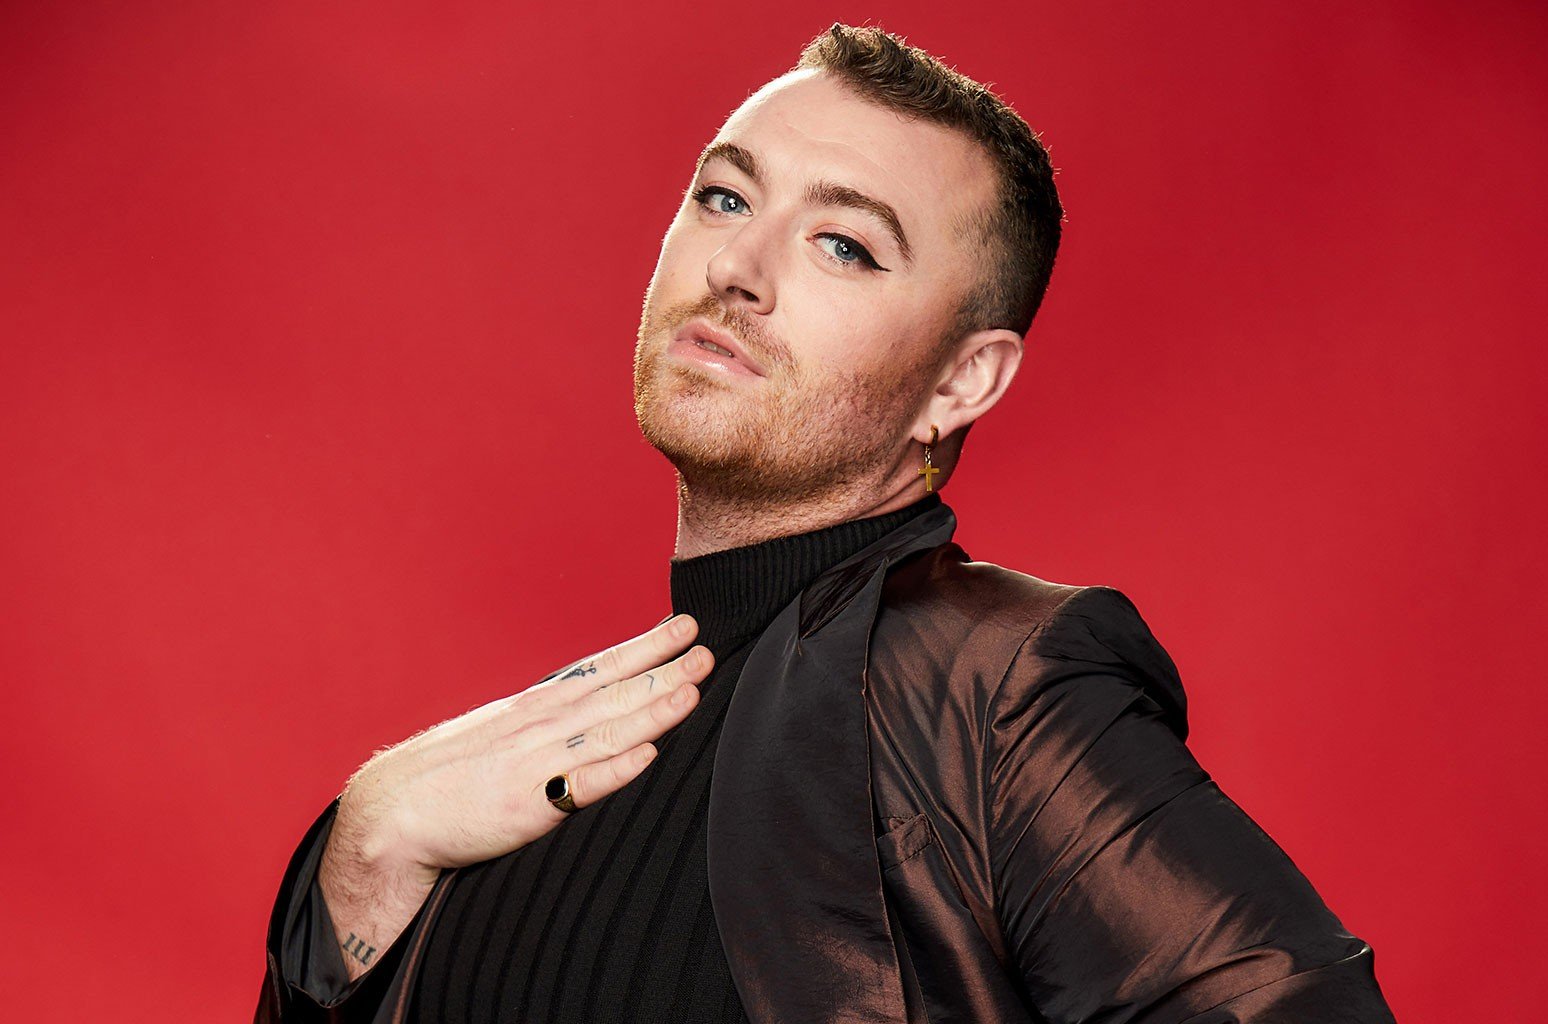 Sam Smith opens up about being vilified after they came out as queer